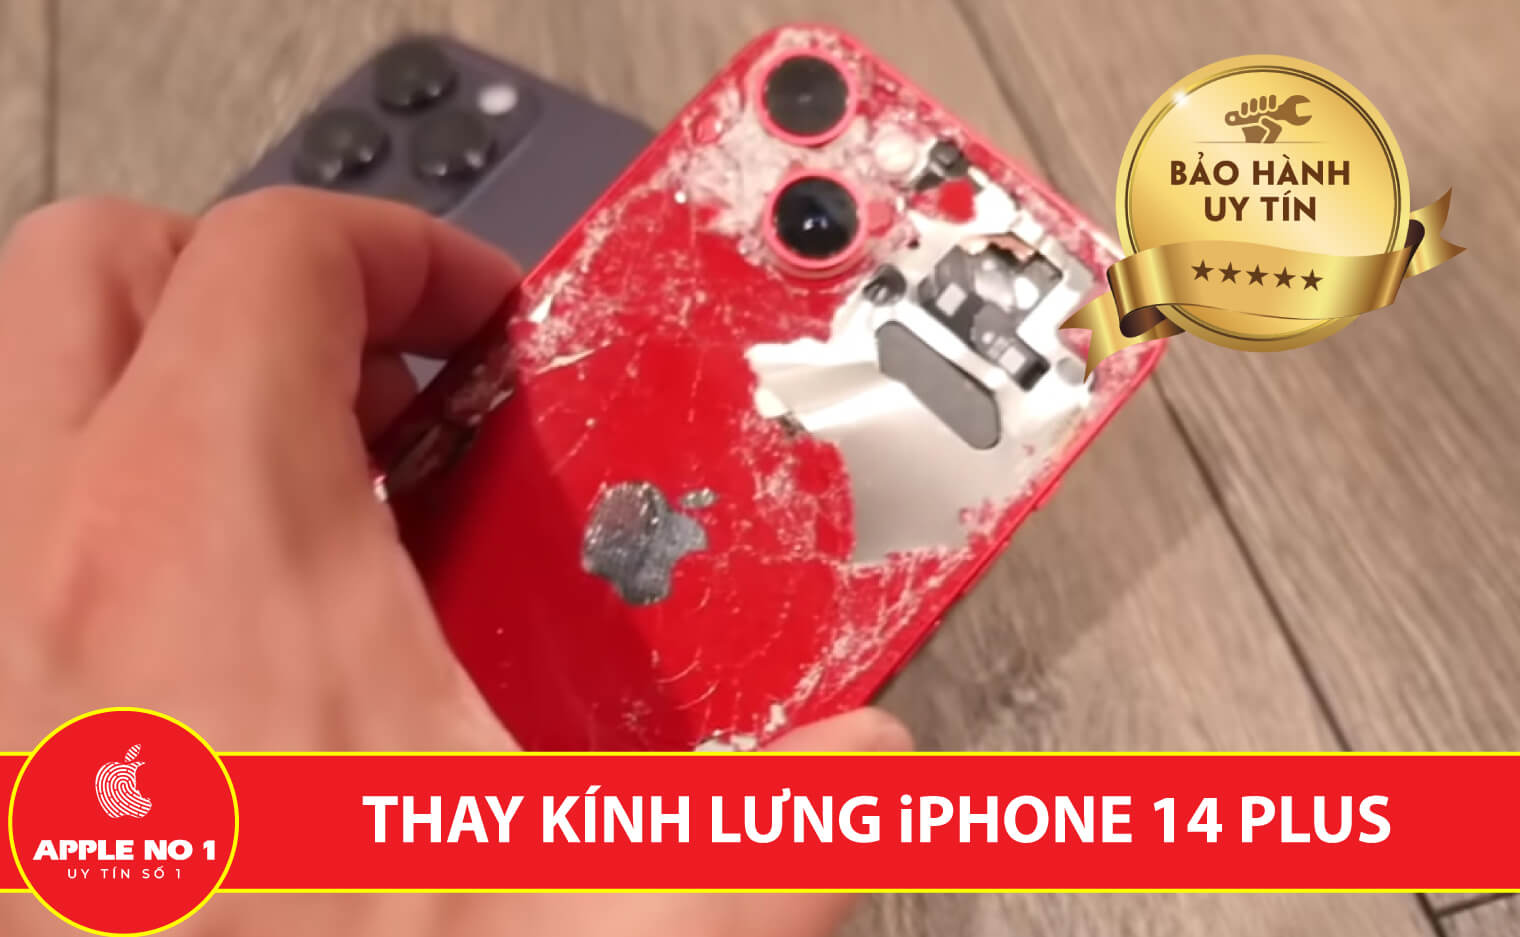 thay kinh lung iphone 14 plus